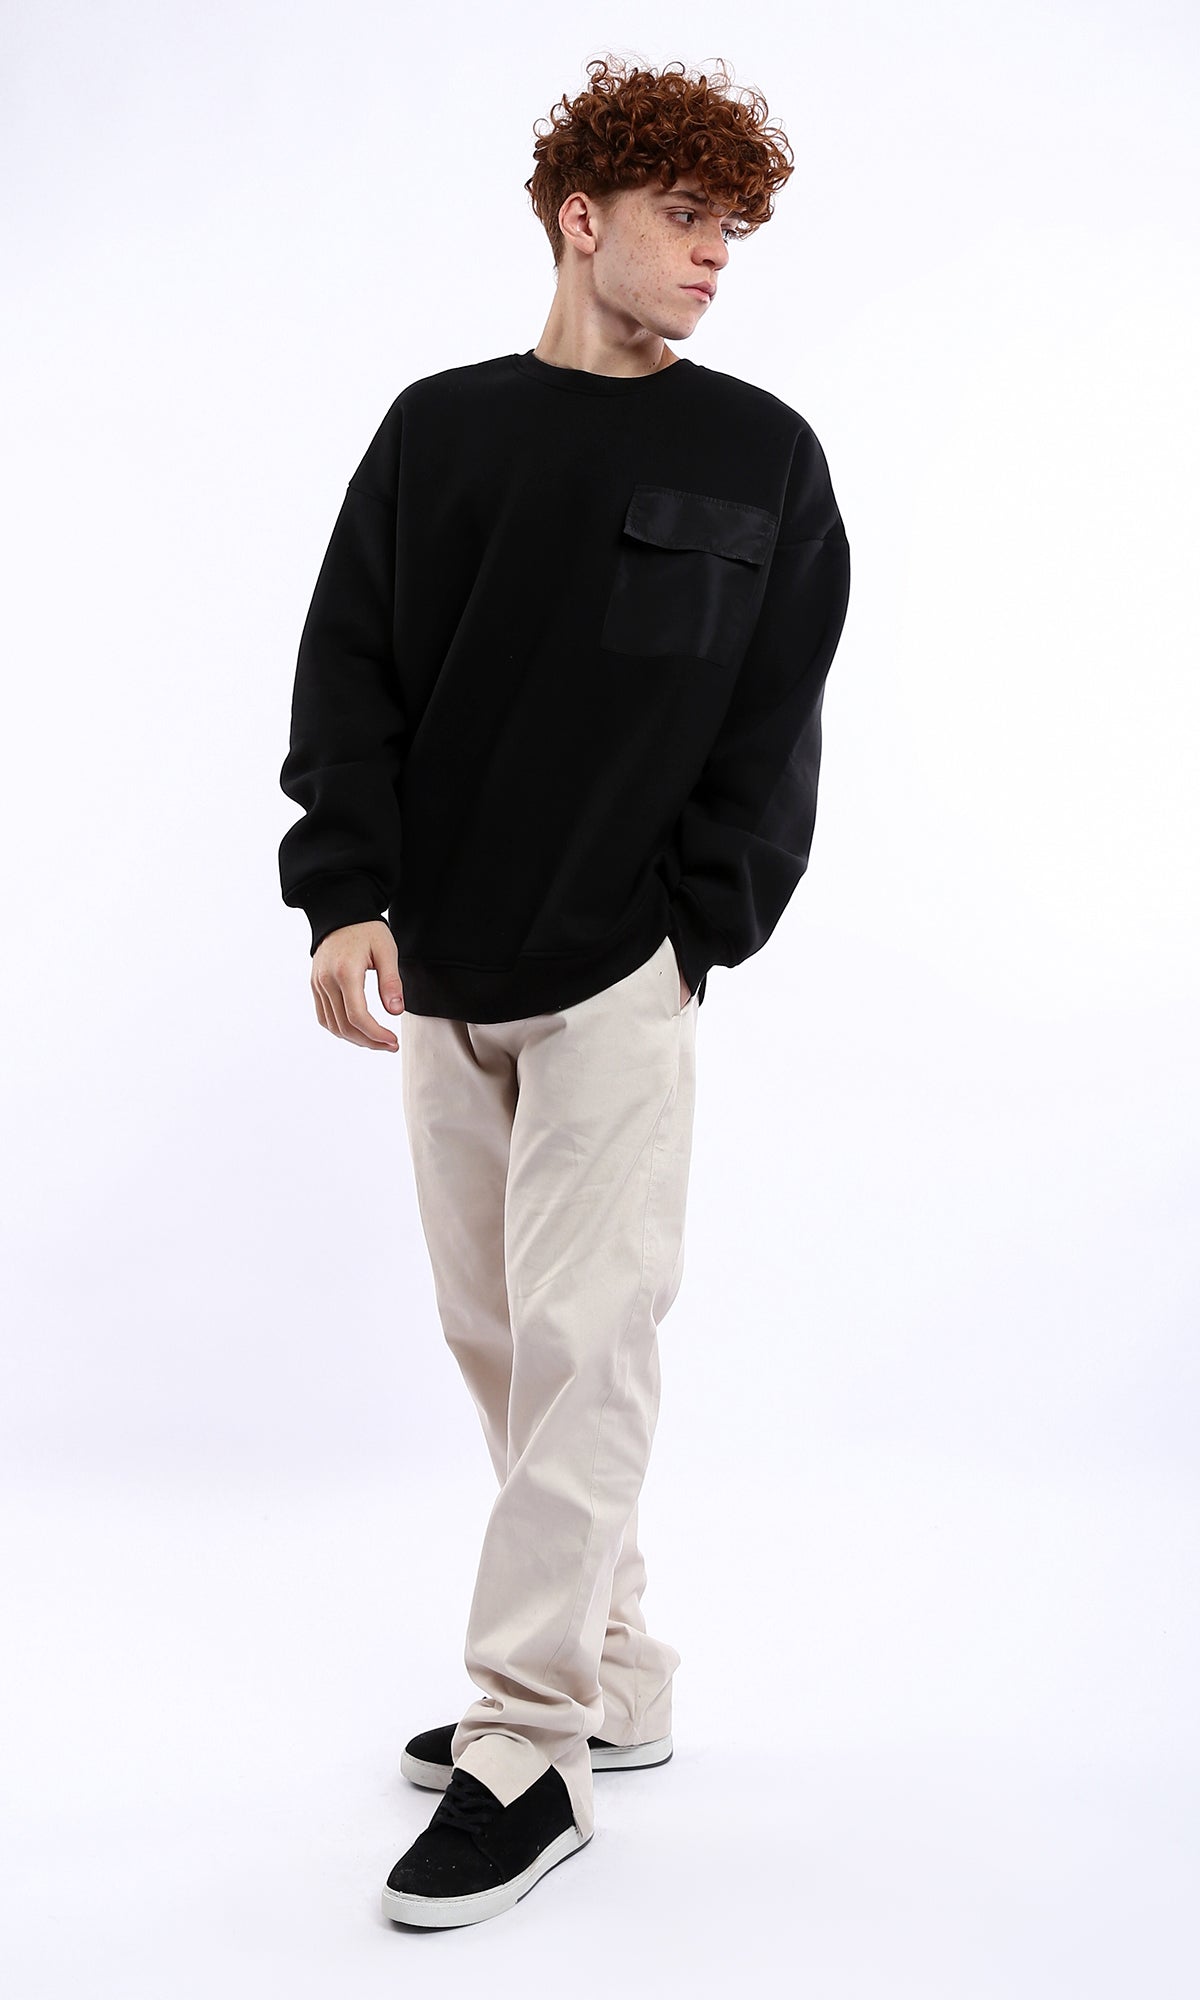 O175660 Relaxed Long Sleeves Solid Winter Sweatshirt - Black